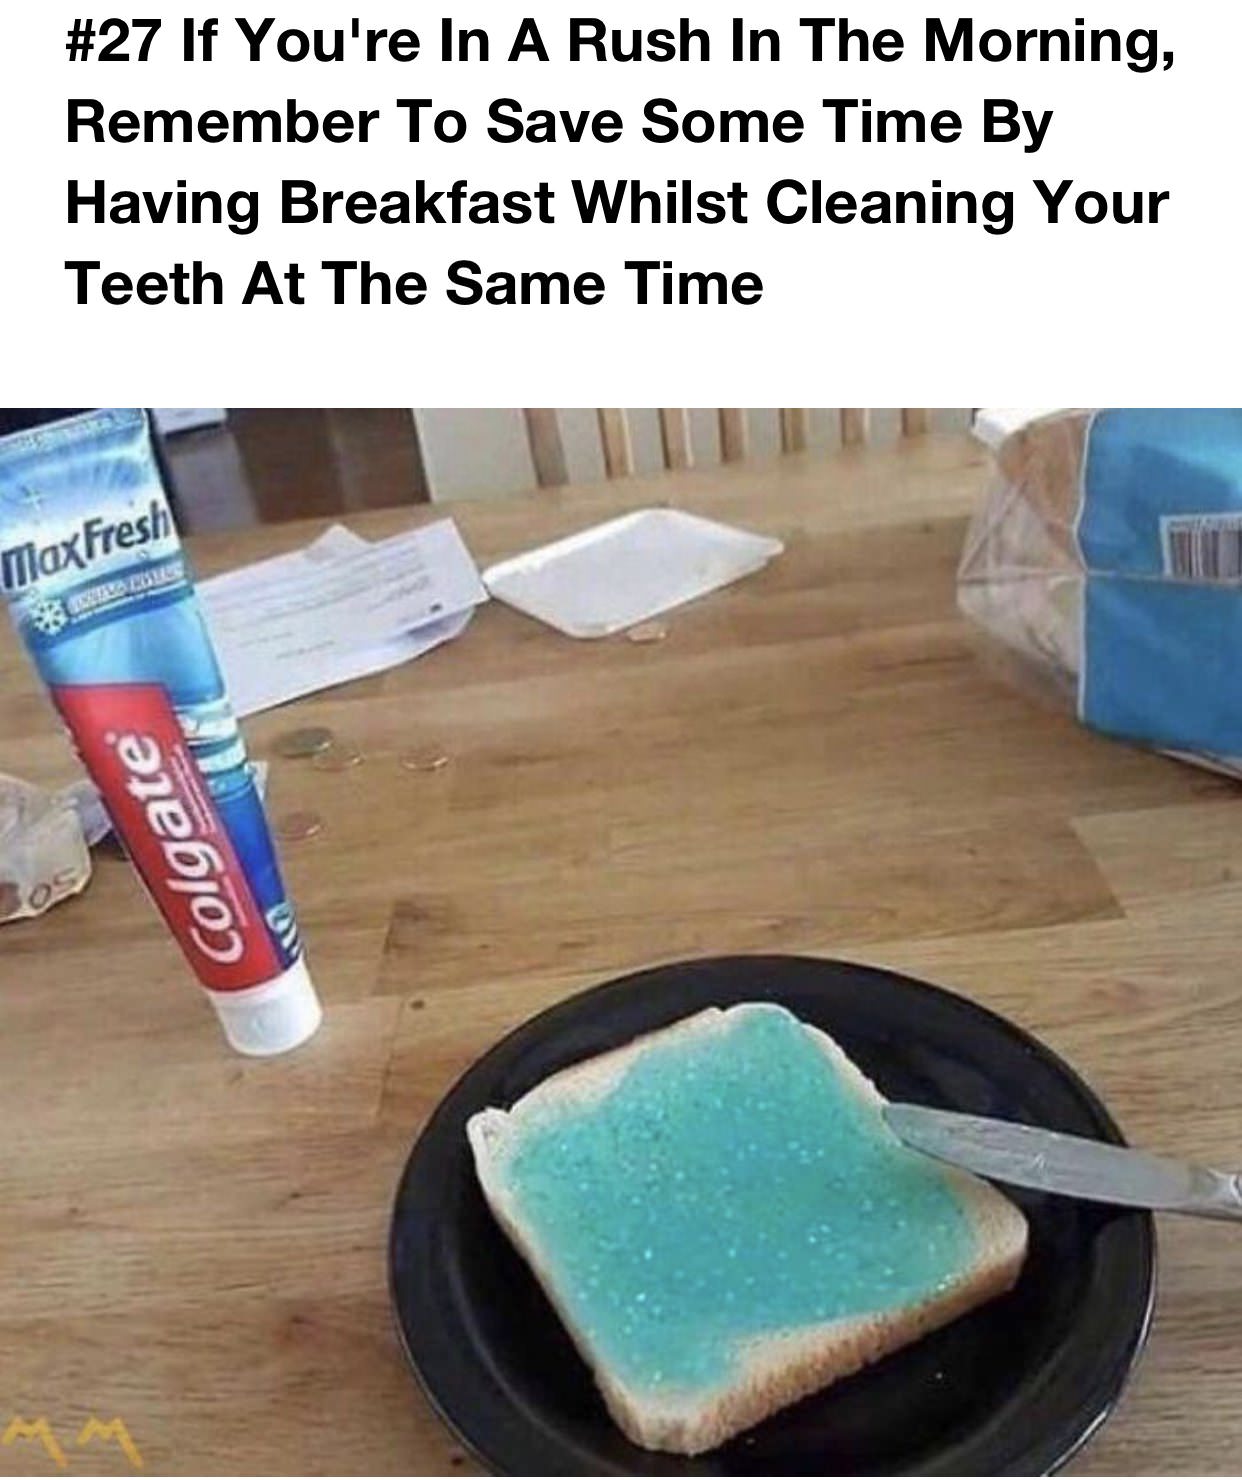 toothpaste toast - If You're In A Rush In The Morning, Remember To Save Some Time By Having Breakfast Whilst Cleaning Your Teeth At The Same Time MaxFresh Alues Colgate